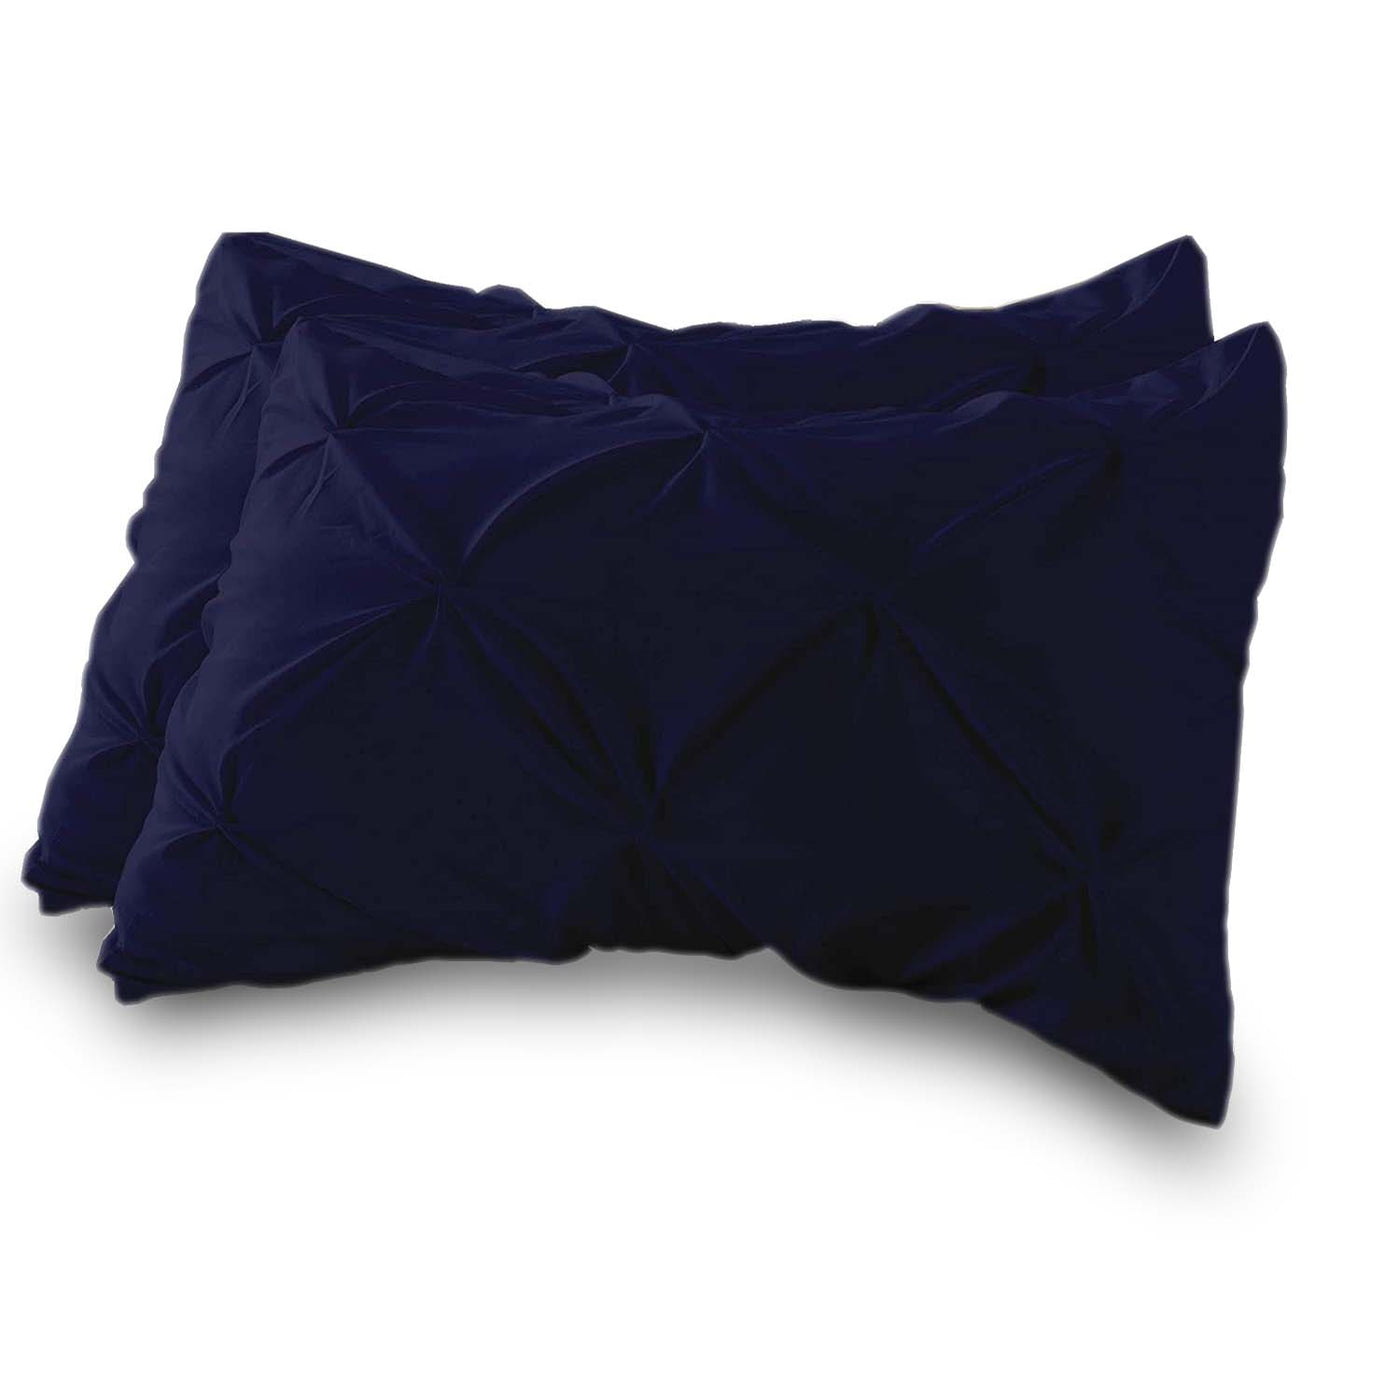 Set Of 2 - 300 TC Egyptian Cotton Pinch Pleated Pillow Covers - Navy Blue